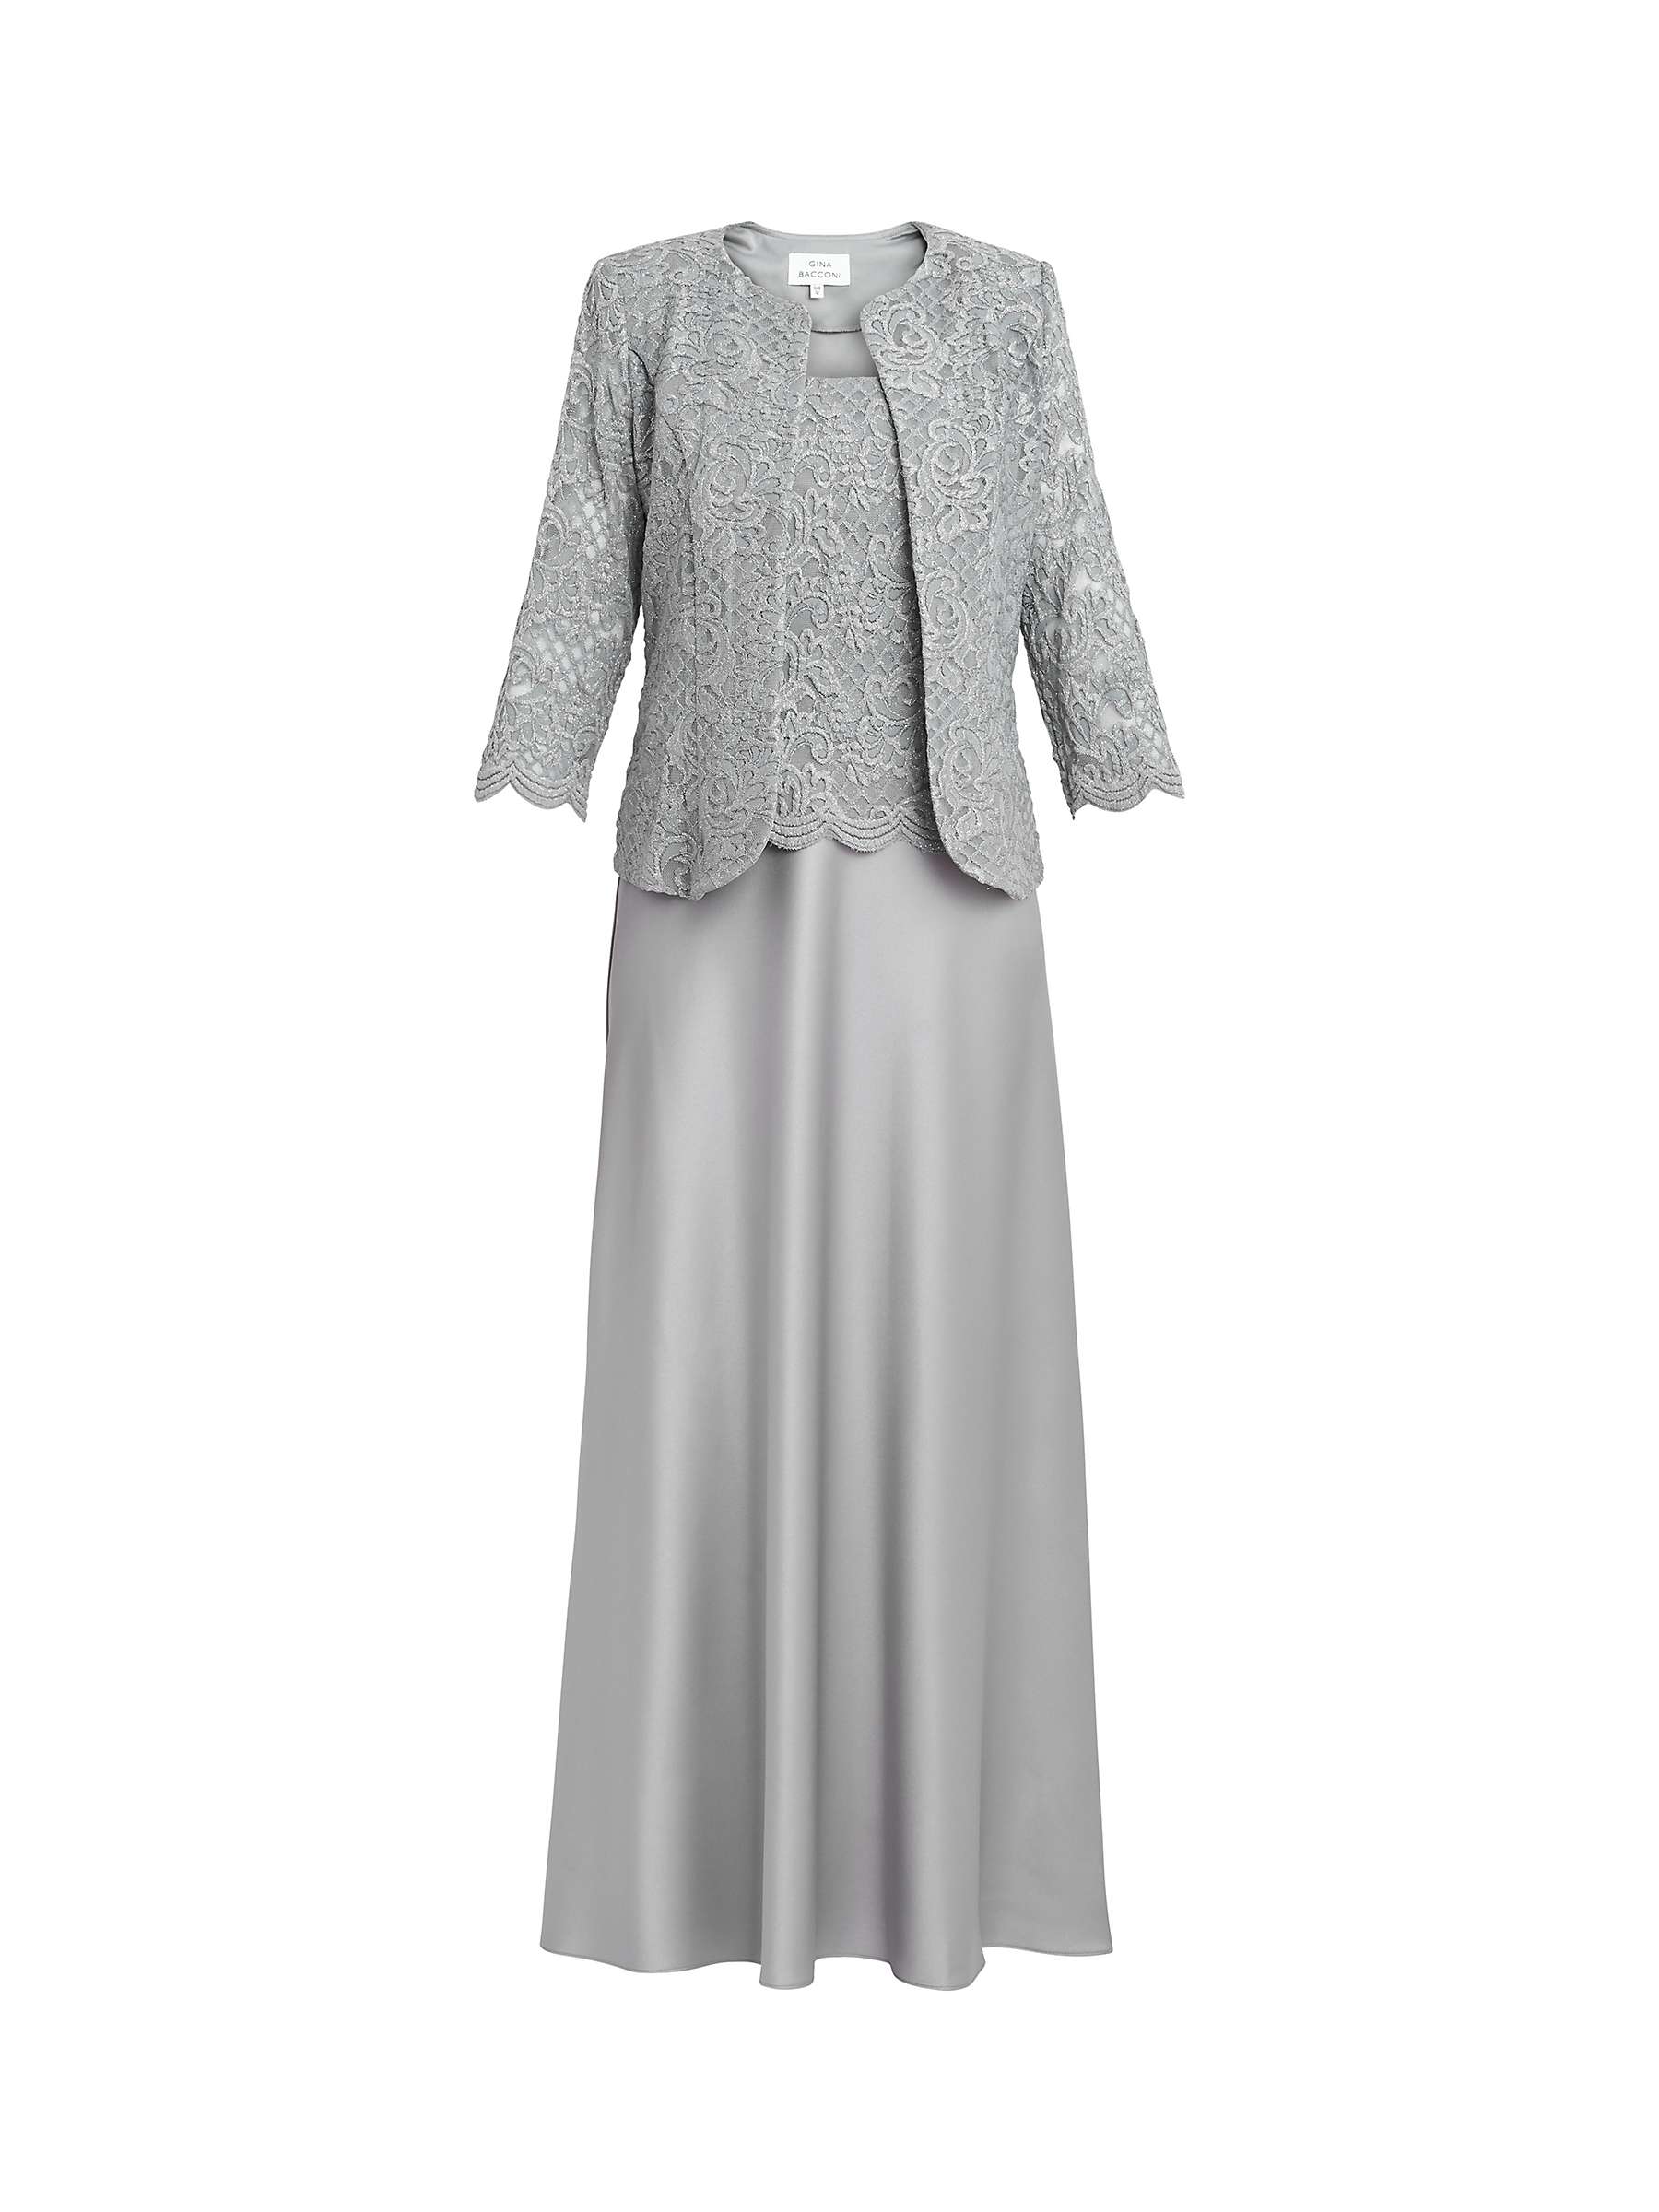 Buy Gina Bacconi Adriana Lace And Satin Dress And Jacket, Ink Online at johnlewis.com